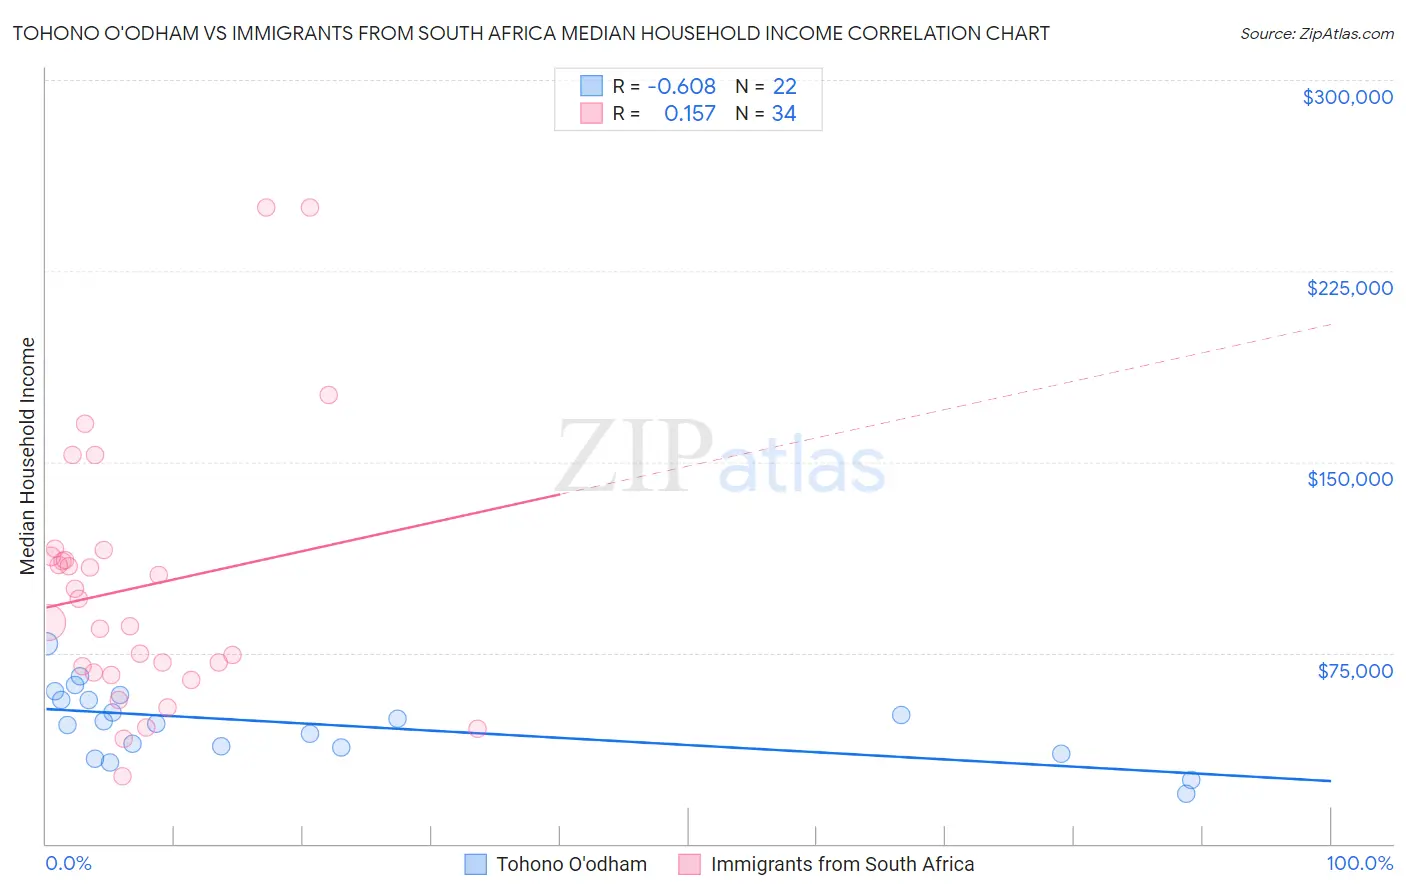 Tohono O'odham vs Immigrants from South Africa Median Household Income